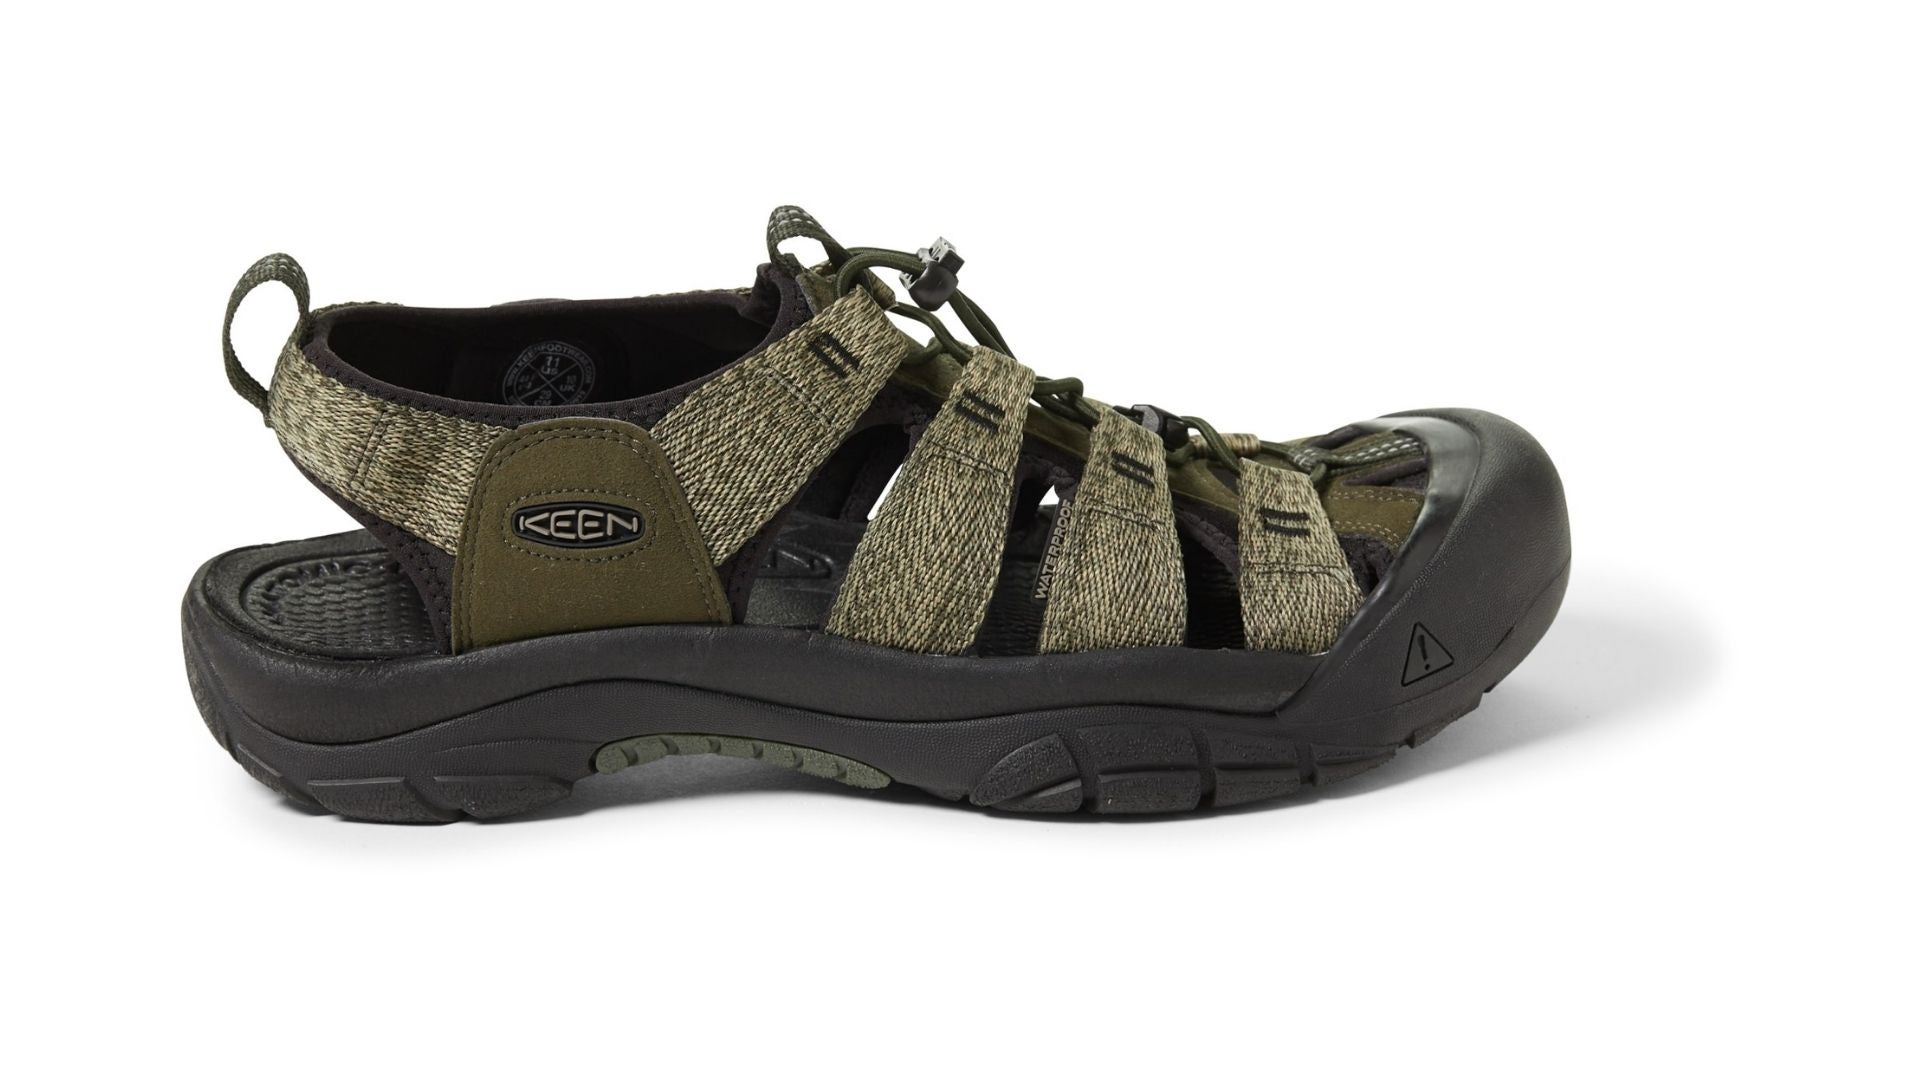 Keen Newport H2 Review  The Ultimate Travel Sandals  Going Awesome Places